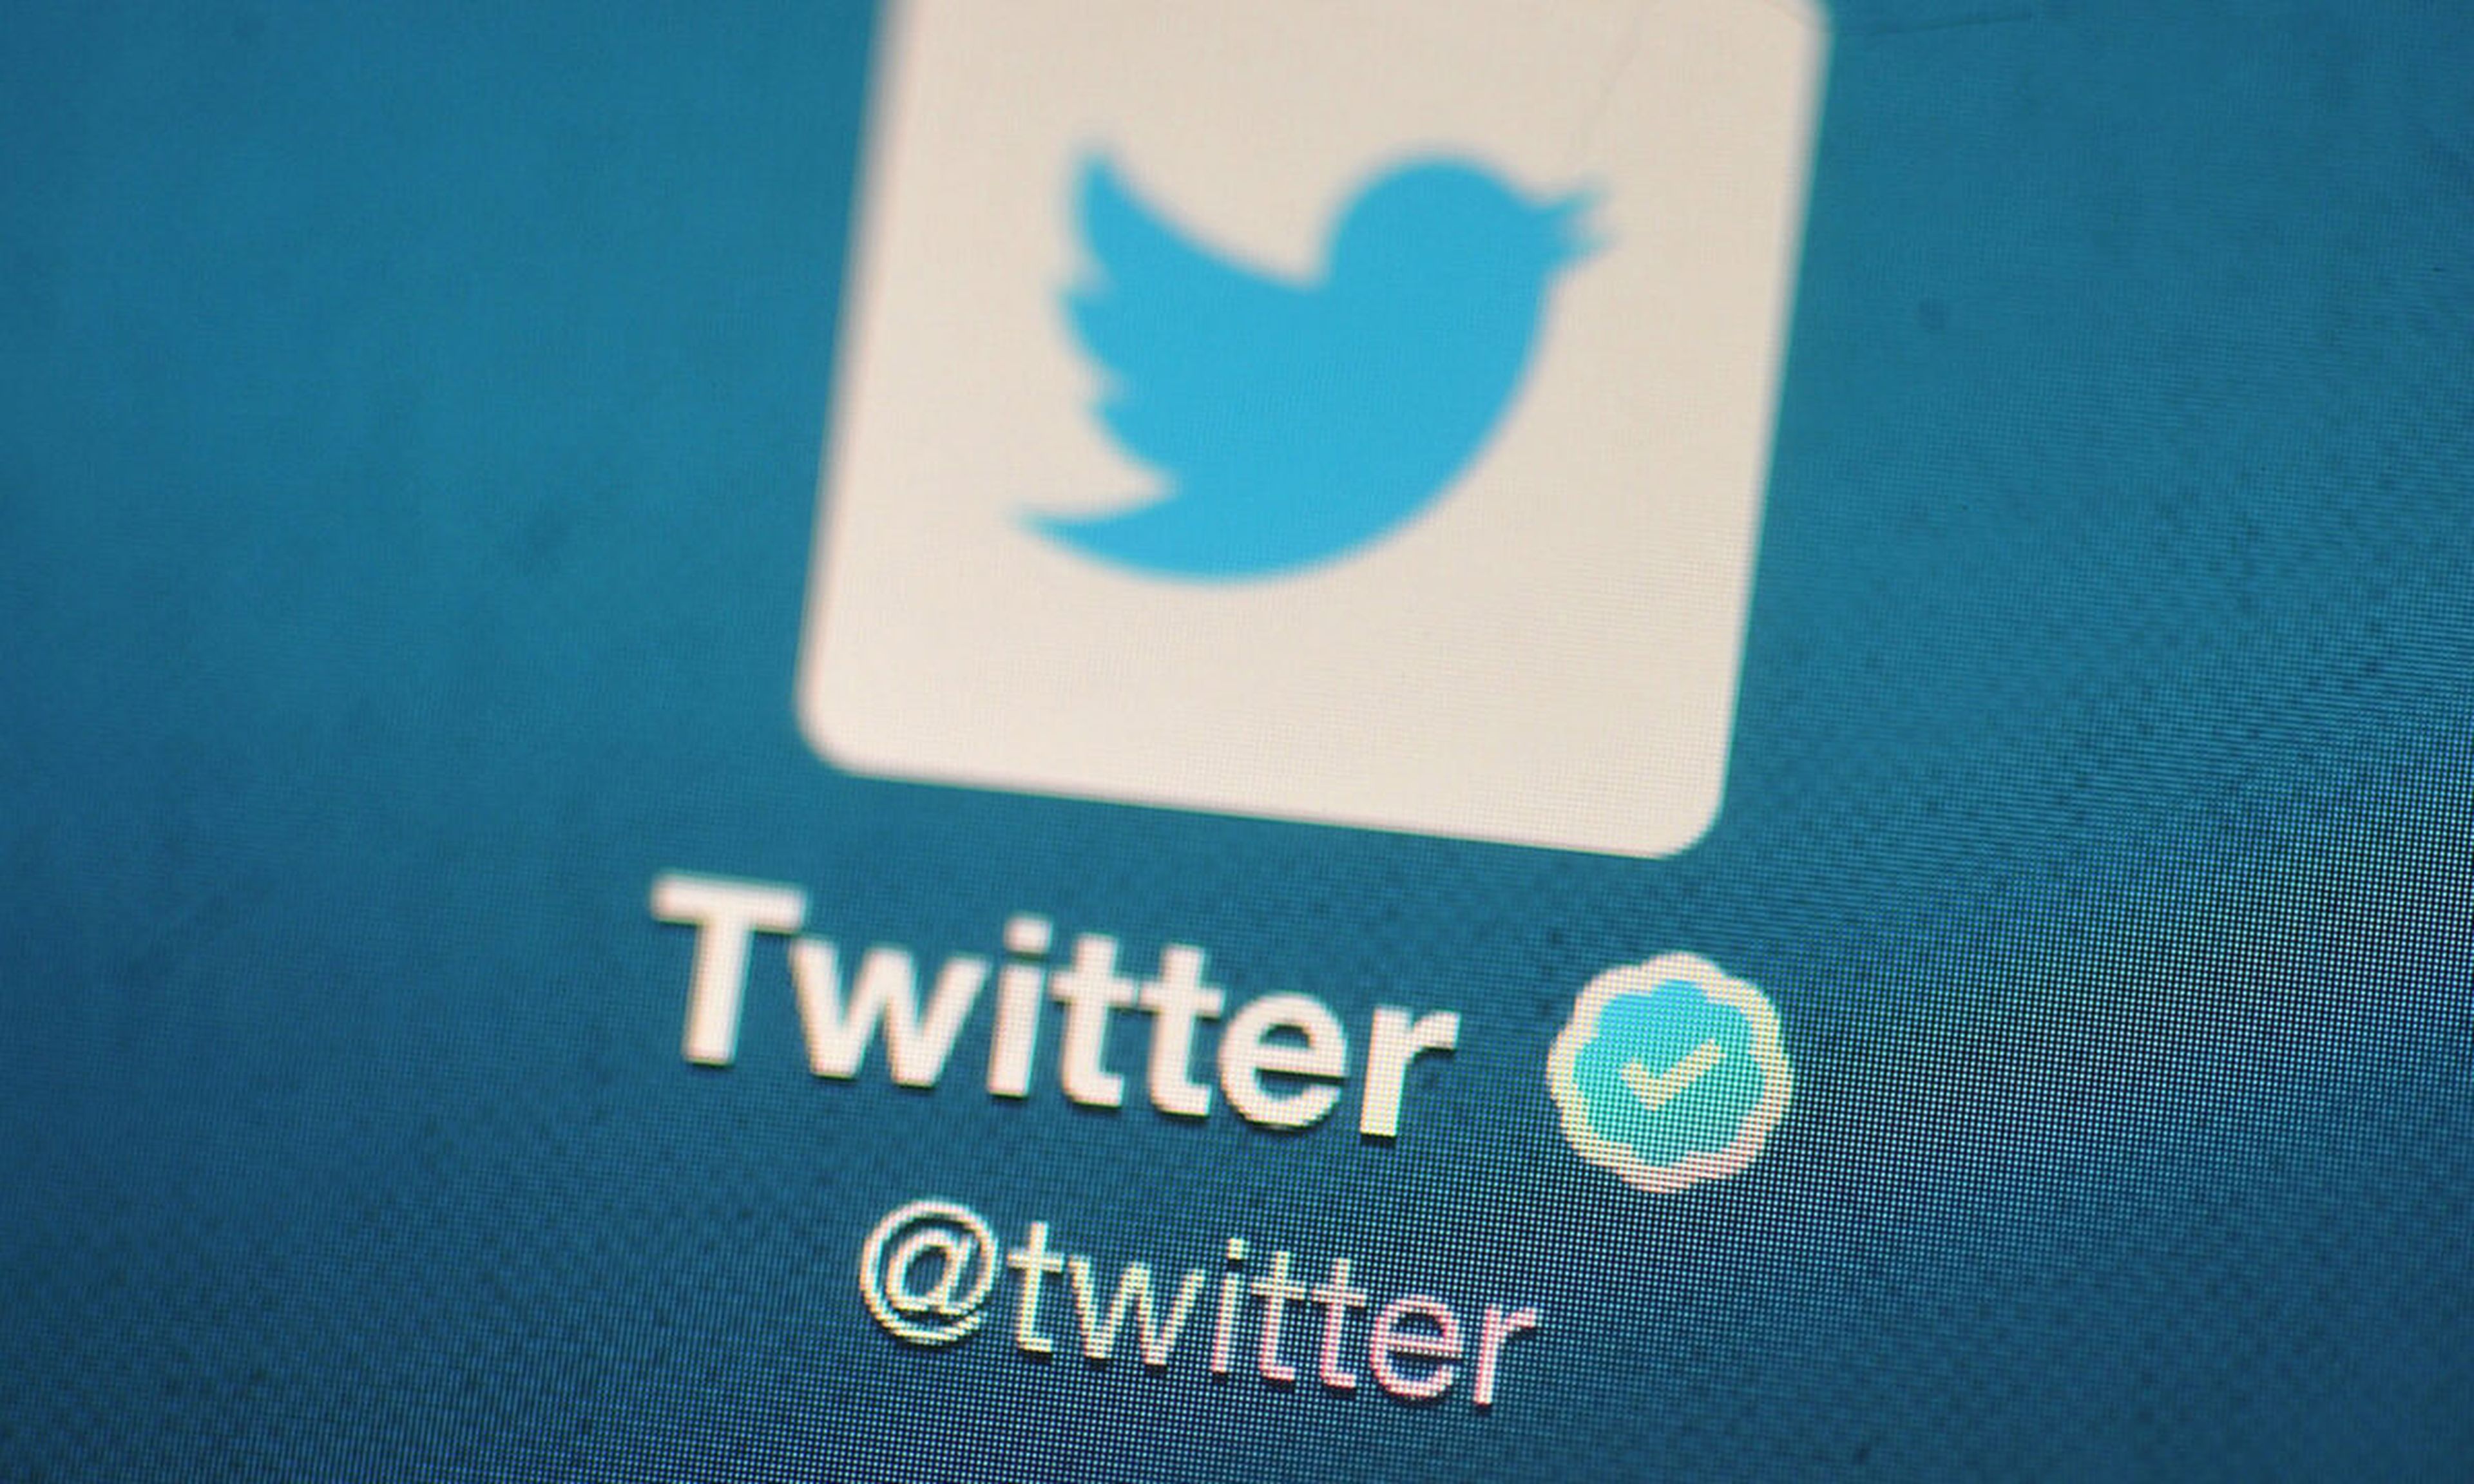 The Twitter logo, a blue bird in a white square, is displayed on a device screen.